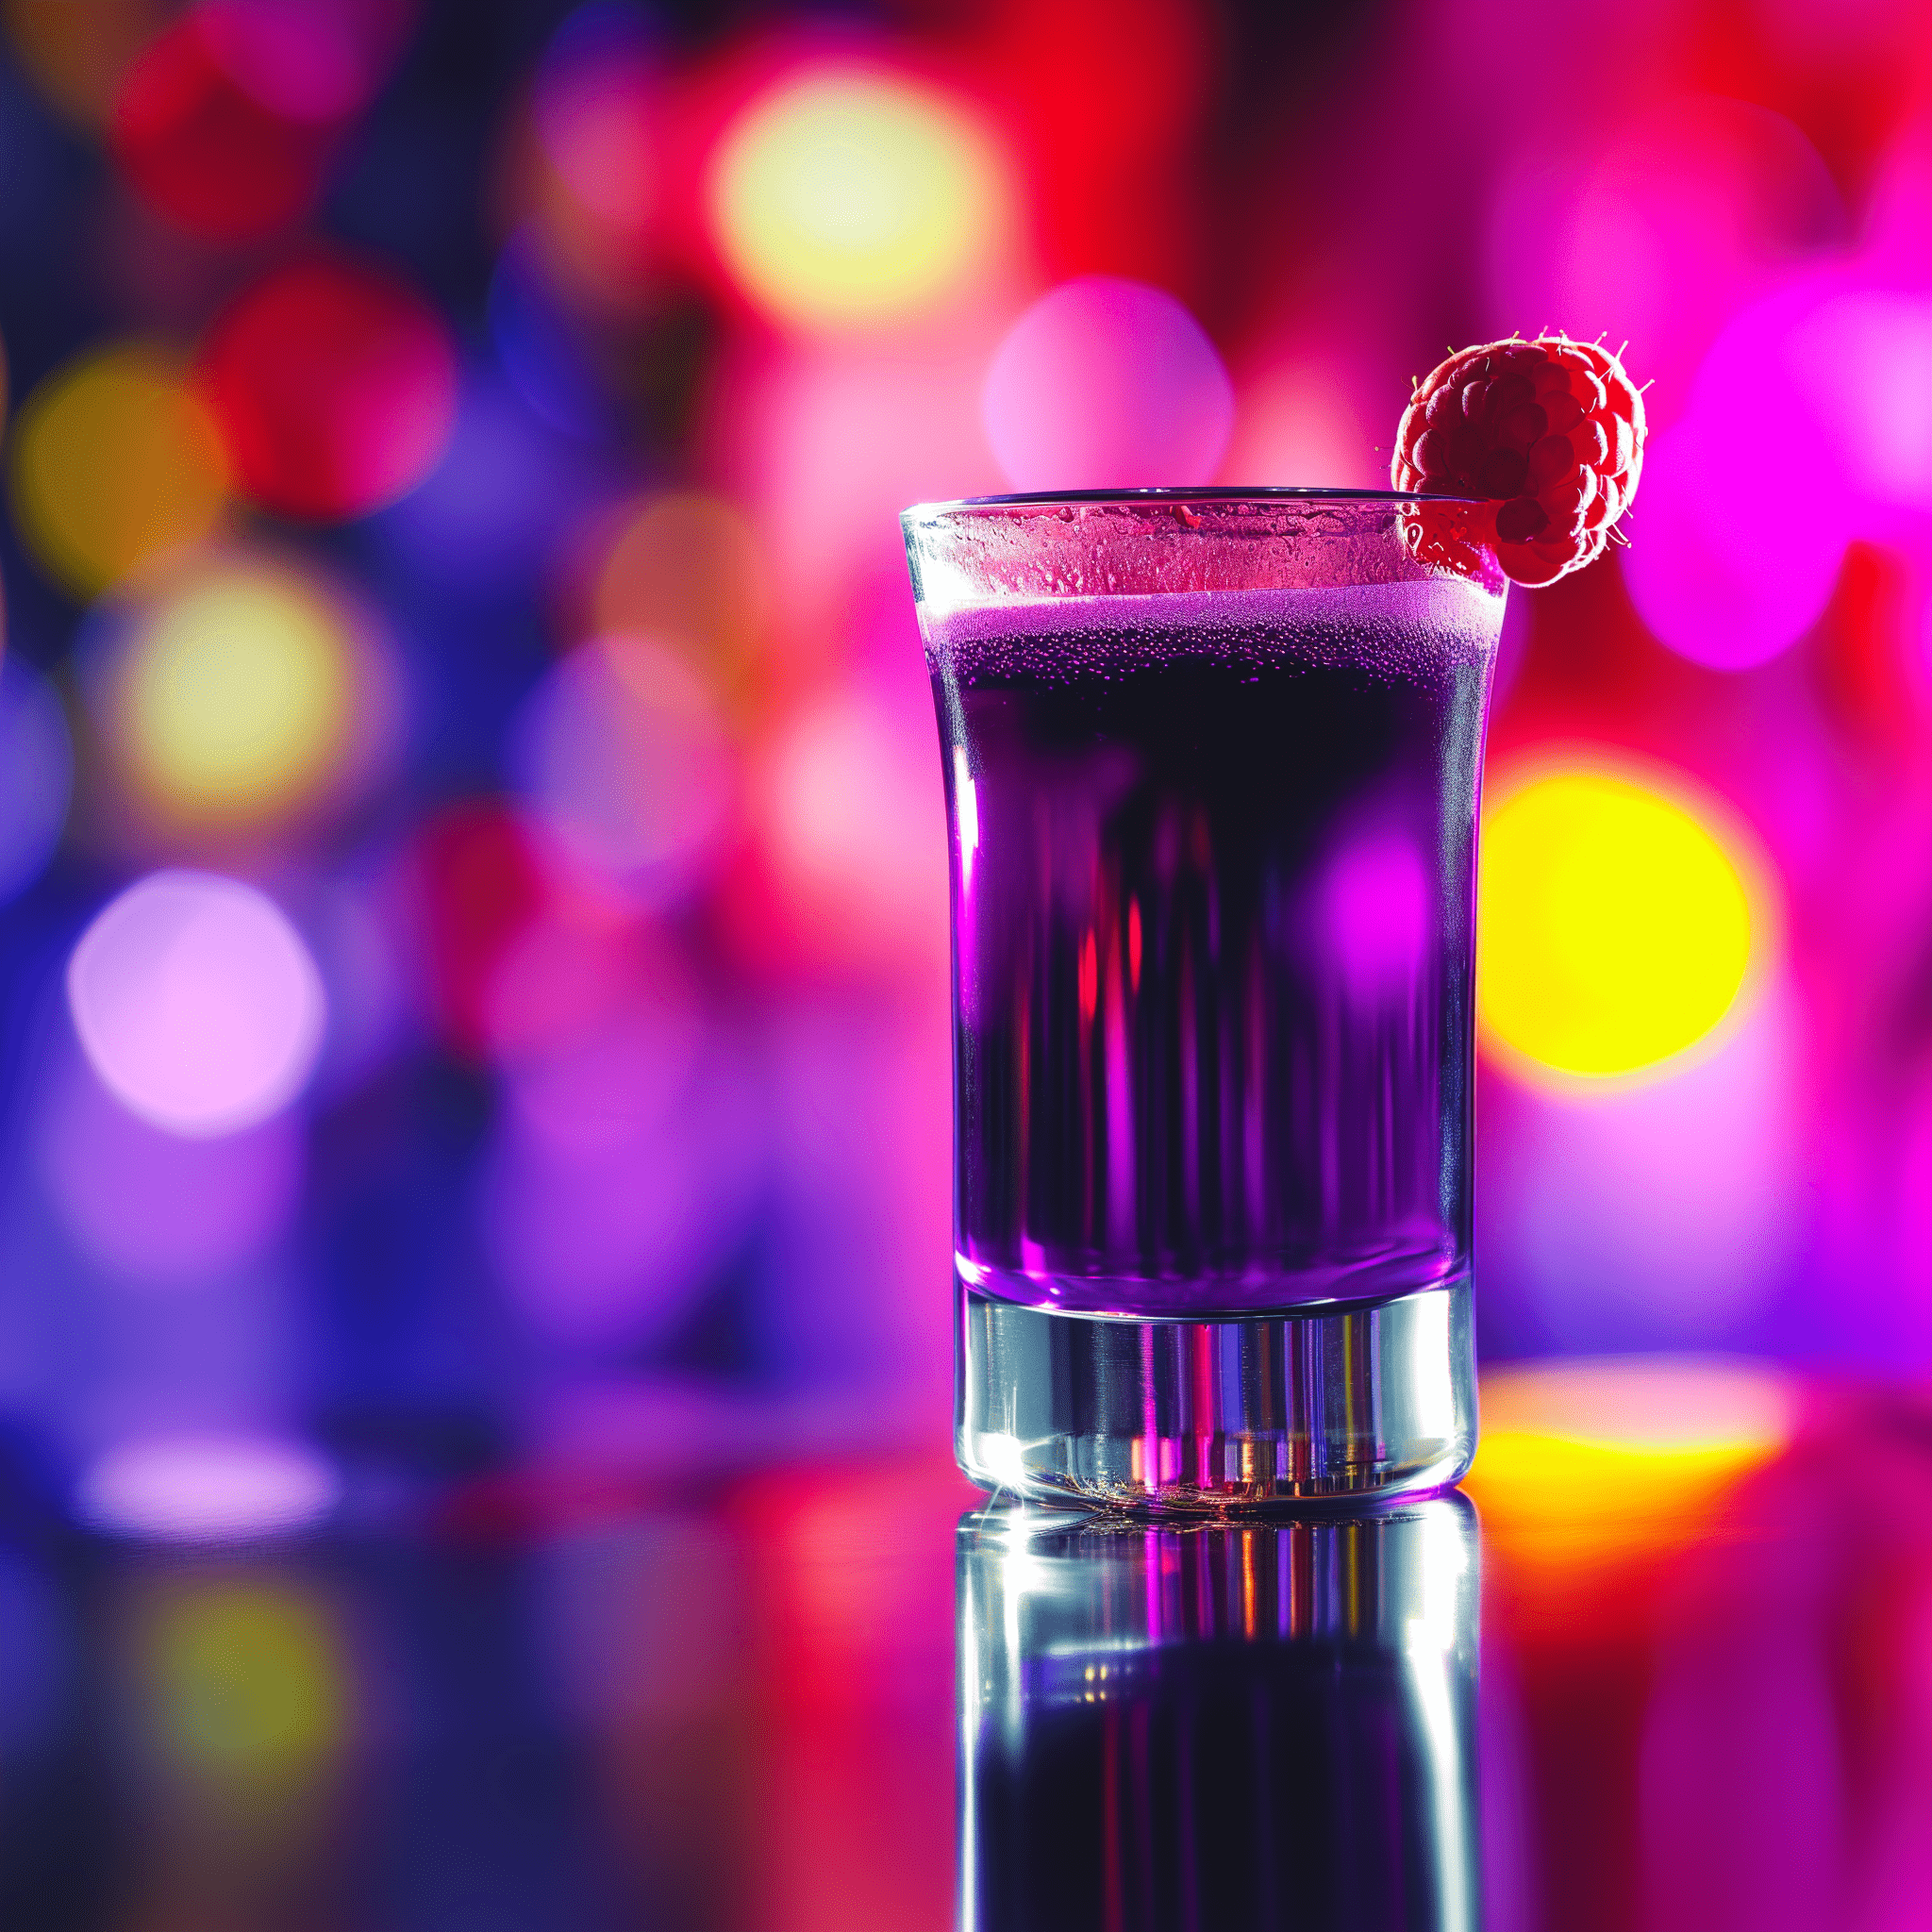 Grape Crush Cocktail Recipe - The Grape Crush cocktail is a delightful combination of sweet, tart, and slightly tangy flavors. The fresh grapes and grape juice provide a natural sweetness, while the lime juice adds a hint of sourness. The vodka gives the drink a subtle kick, making it a well-balanced and refreshing beverage.